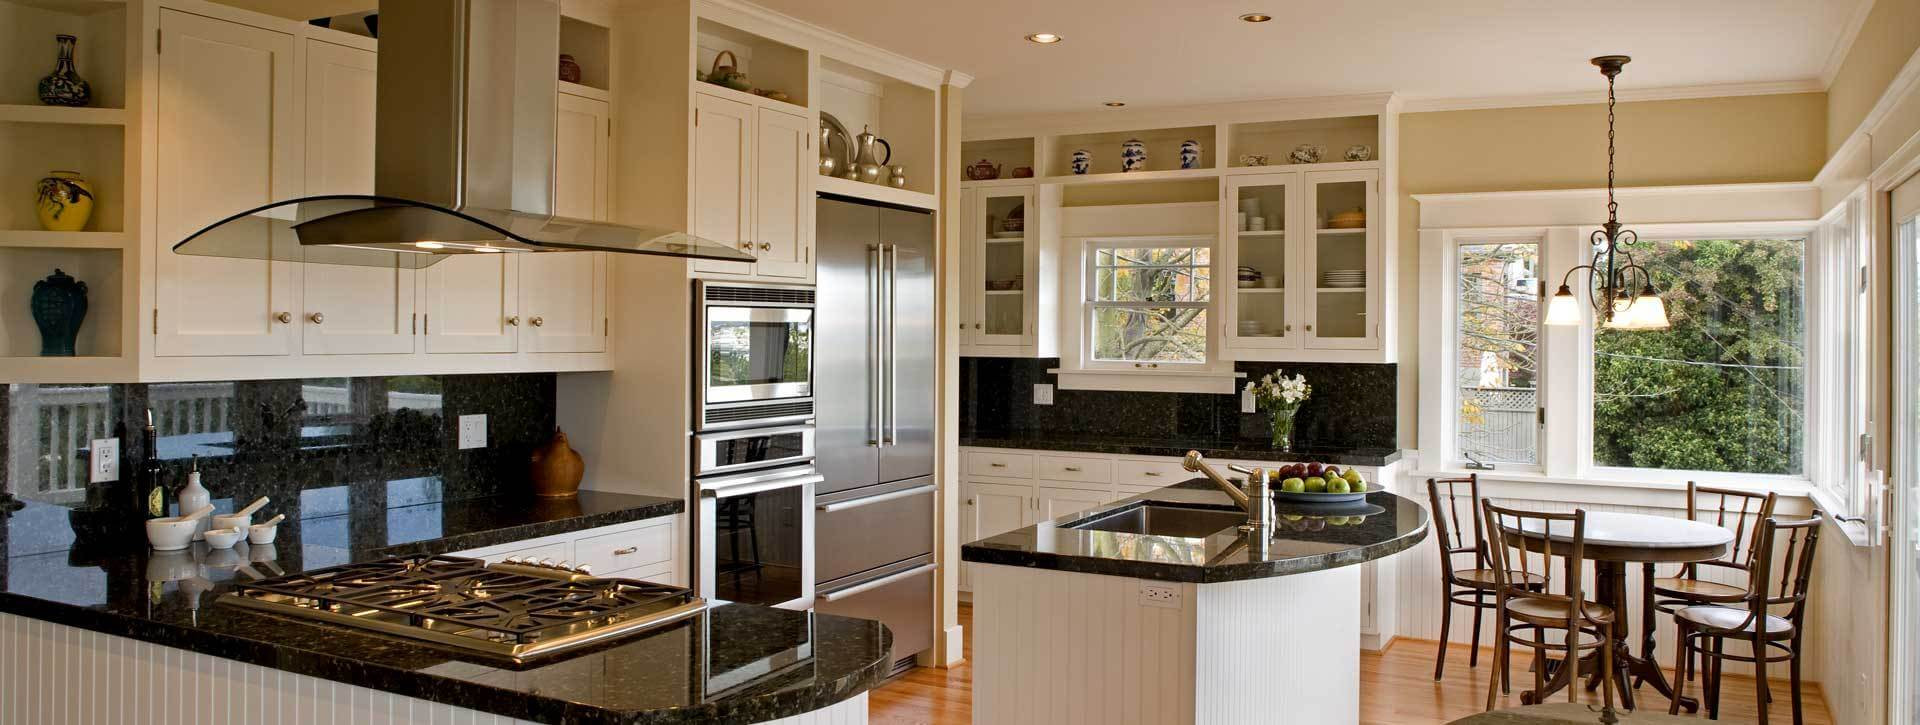 Cost Of Small Kitchen Remodel
 Kitchen Remodel Estimator to Set Your Bud